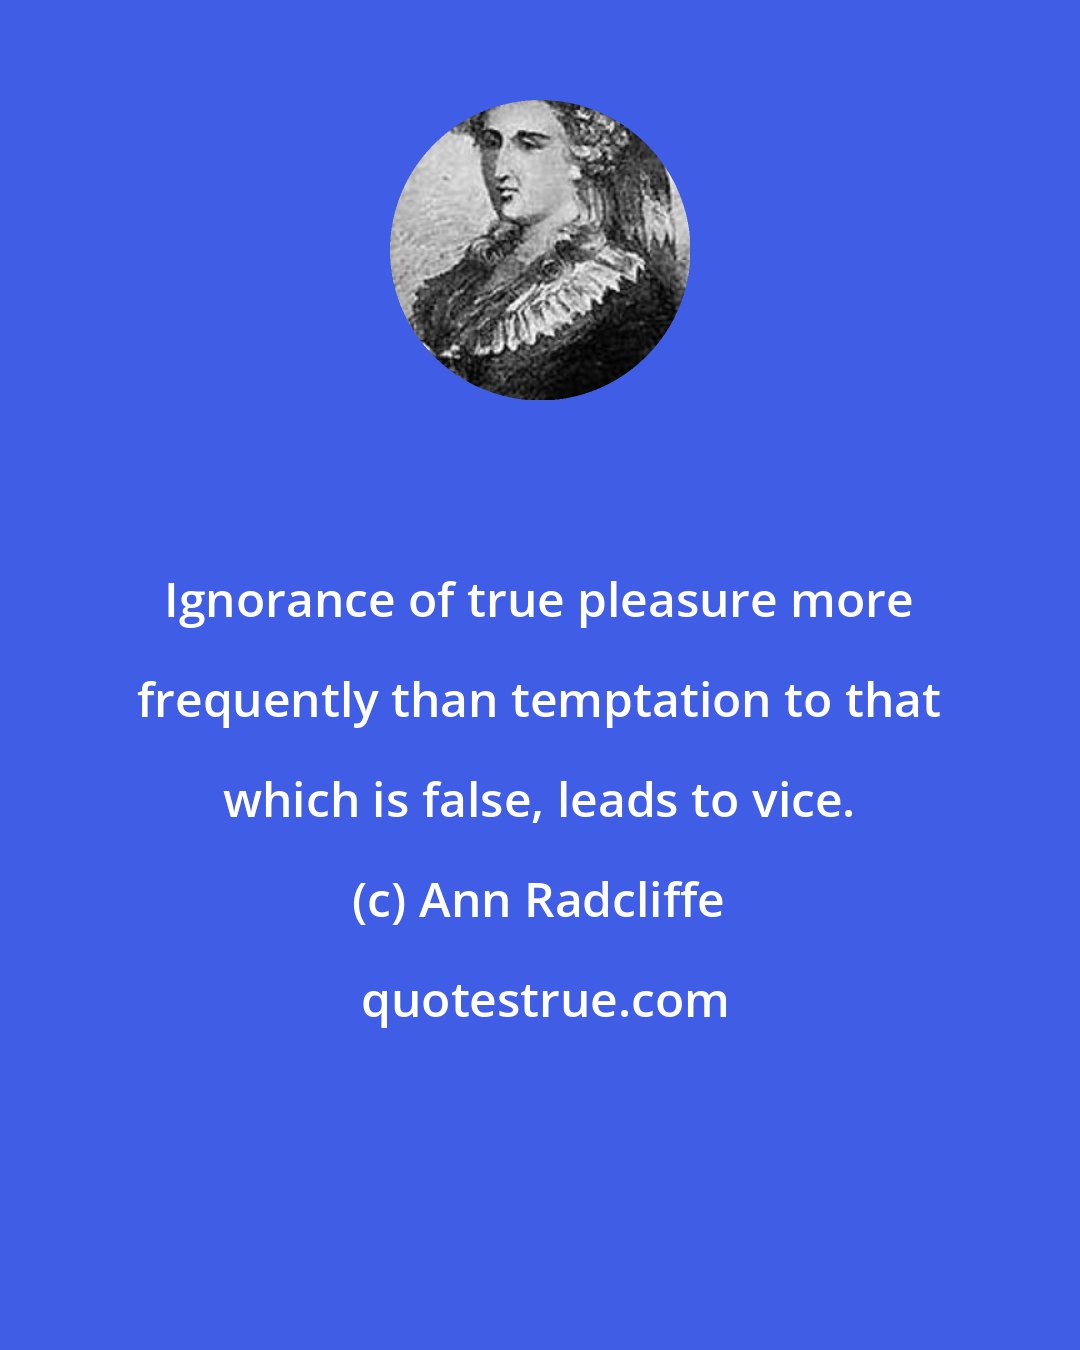 Ann Radcliffe: Ignorance of true pleasure more frequently than temptation to that which is false, leads to vice.